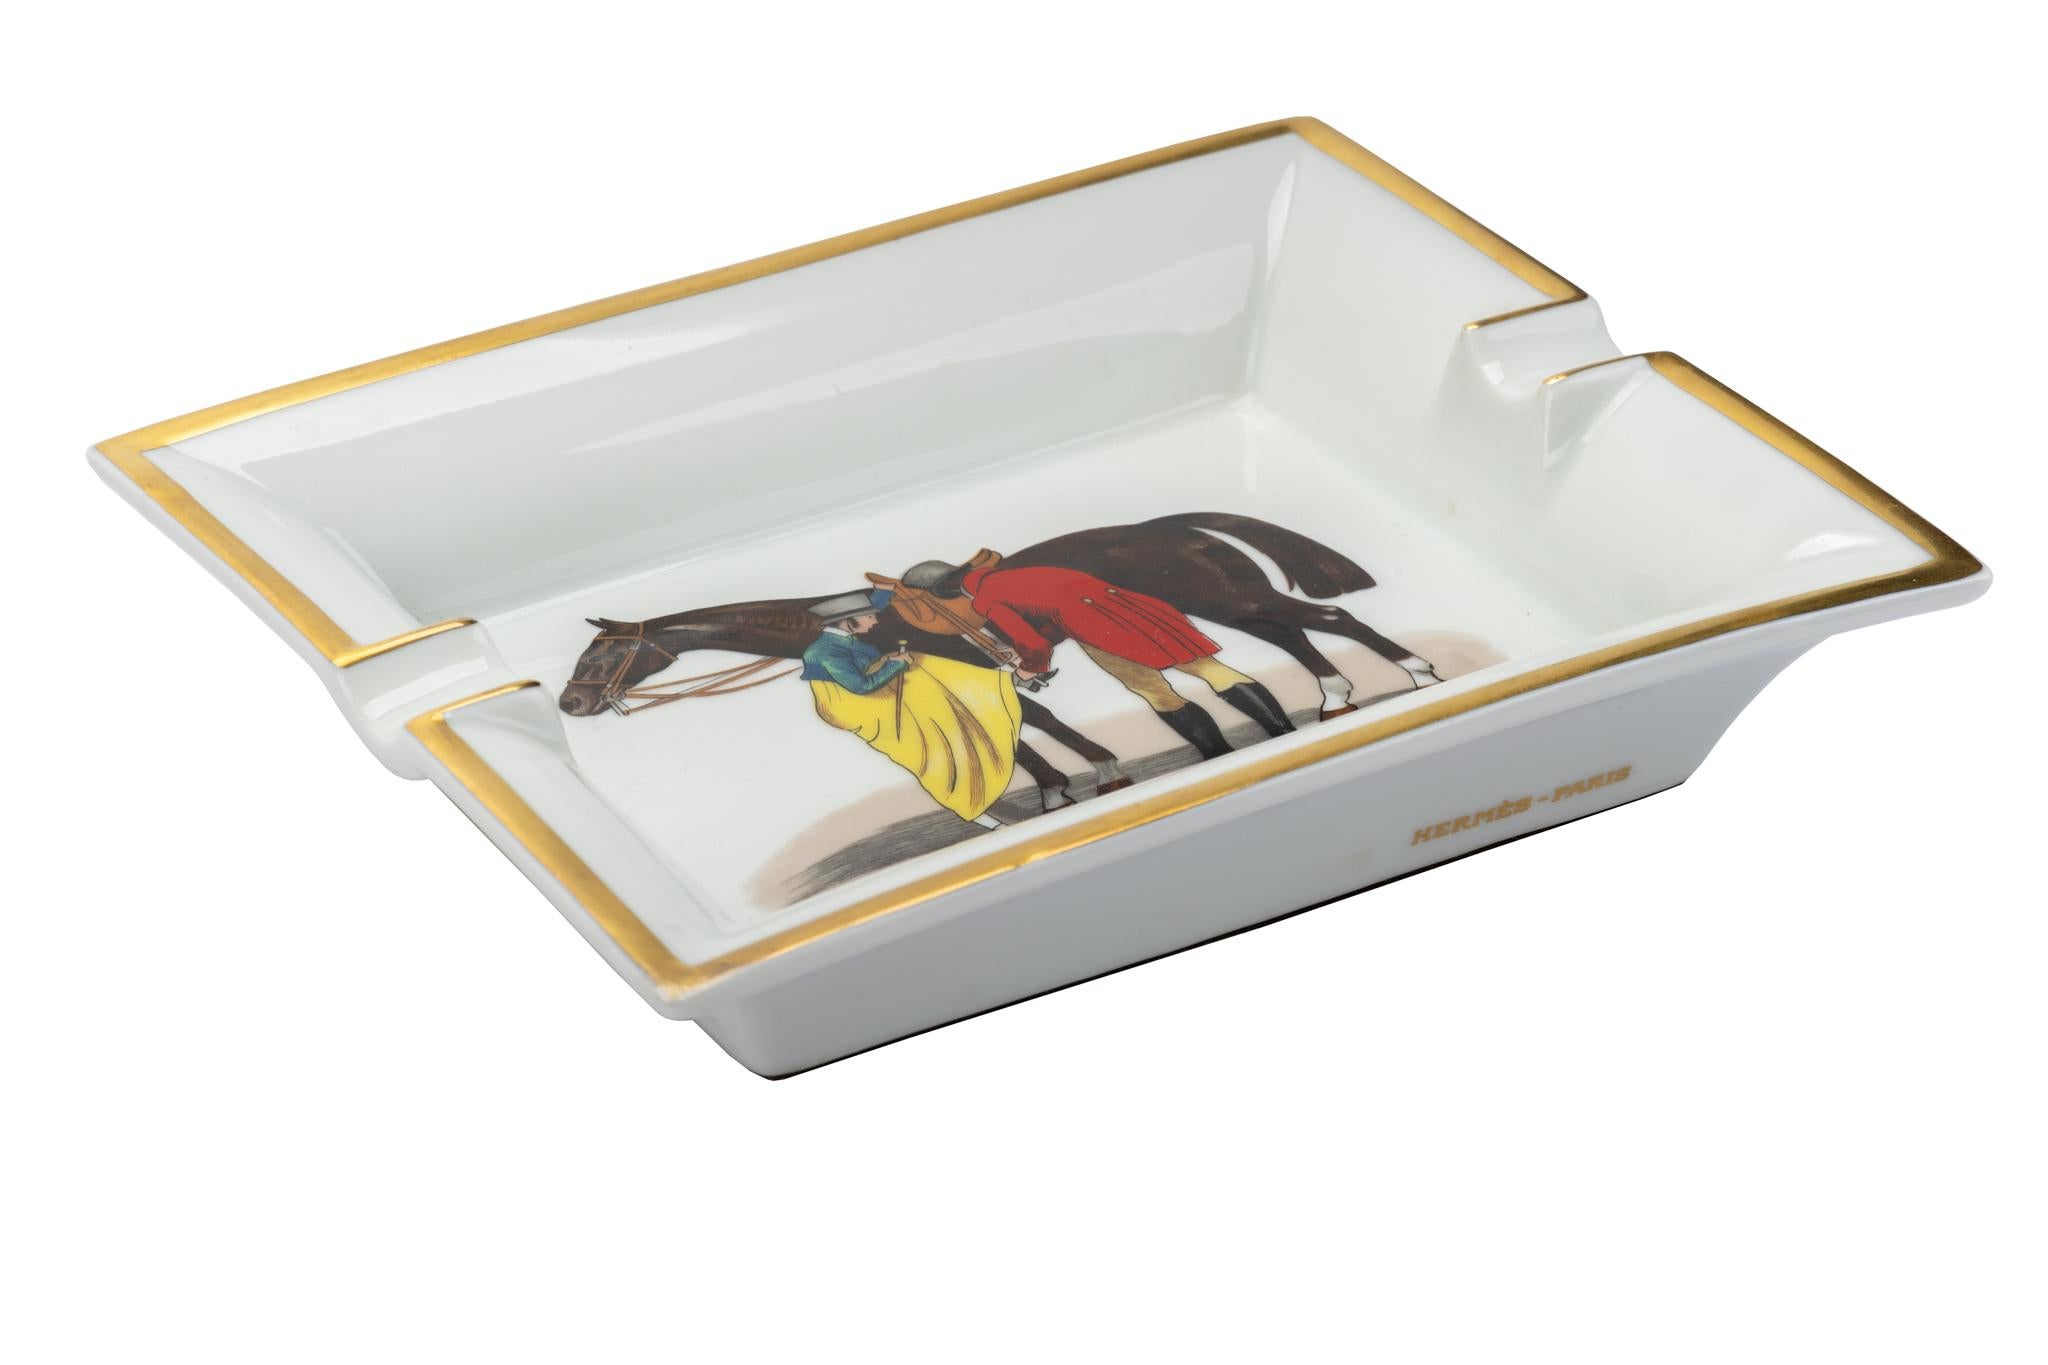 Hermes signature ashtray with horse design in brown, yellow and gold. Suede stamped bottom. Made in France.